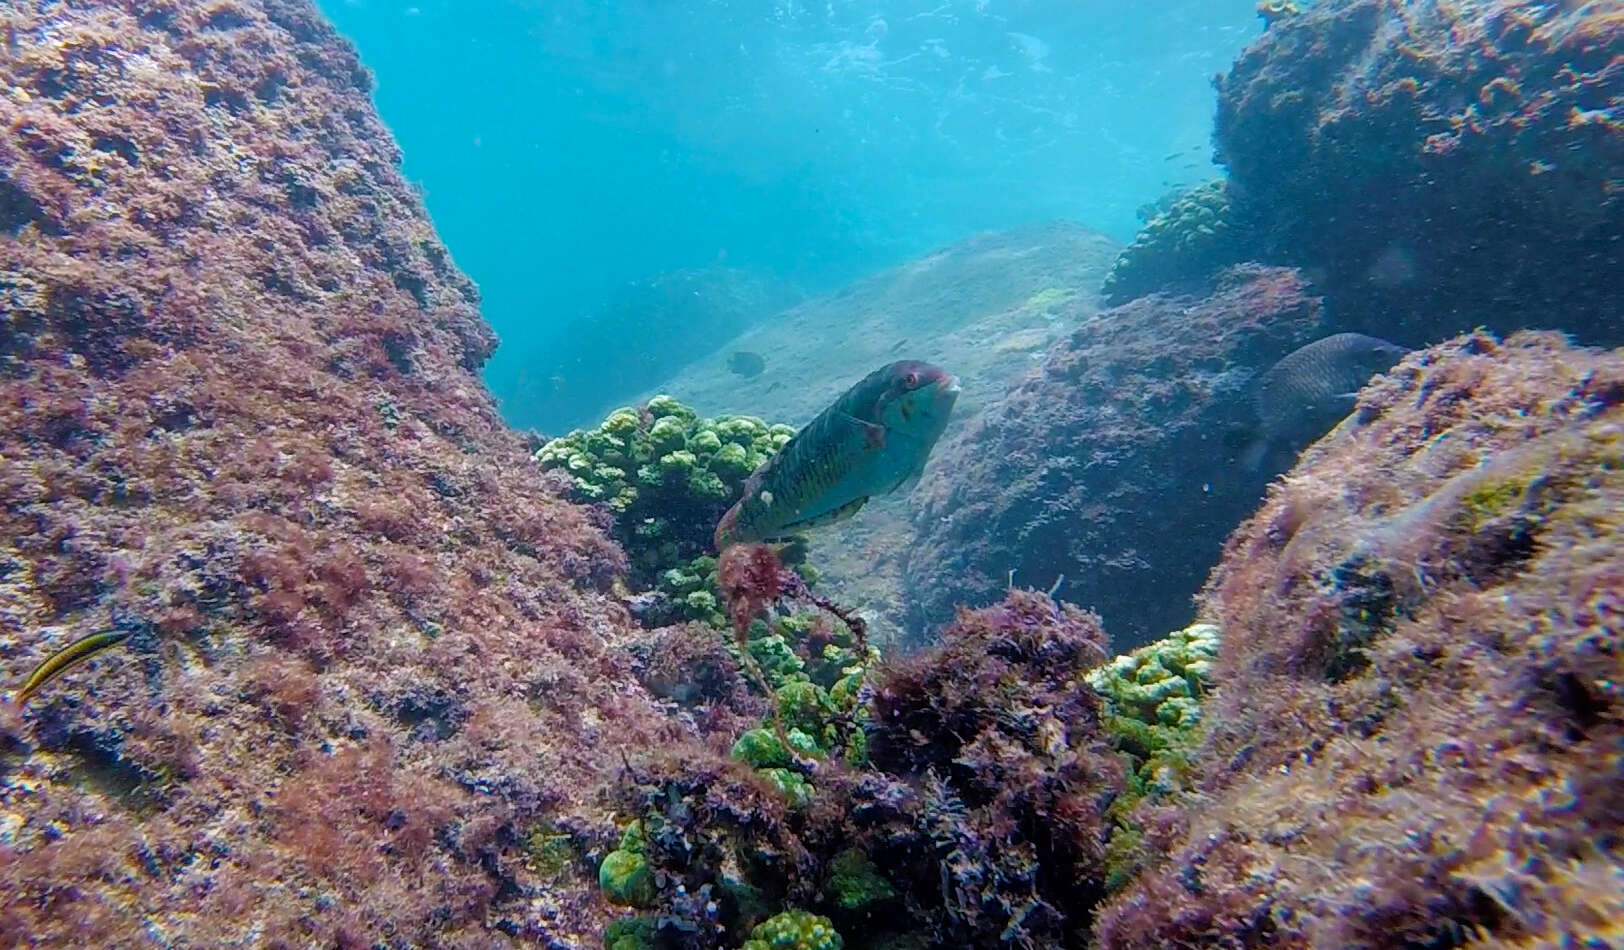 Image of Wounded wrasse